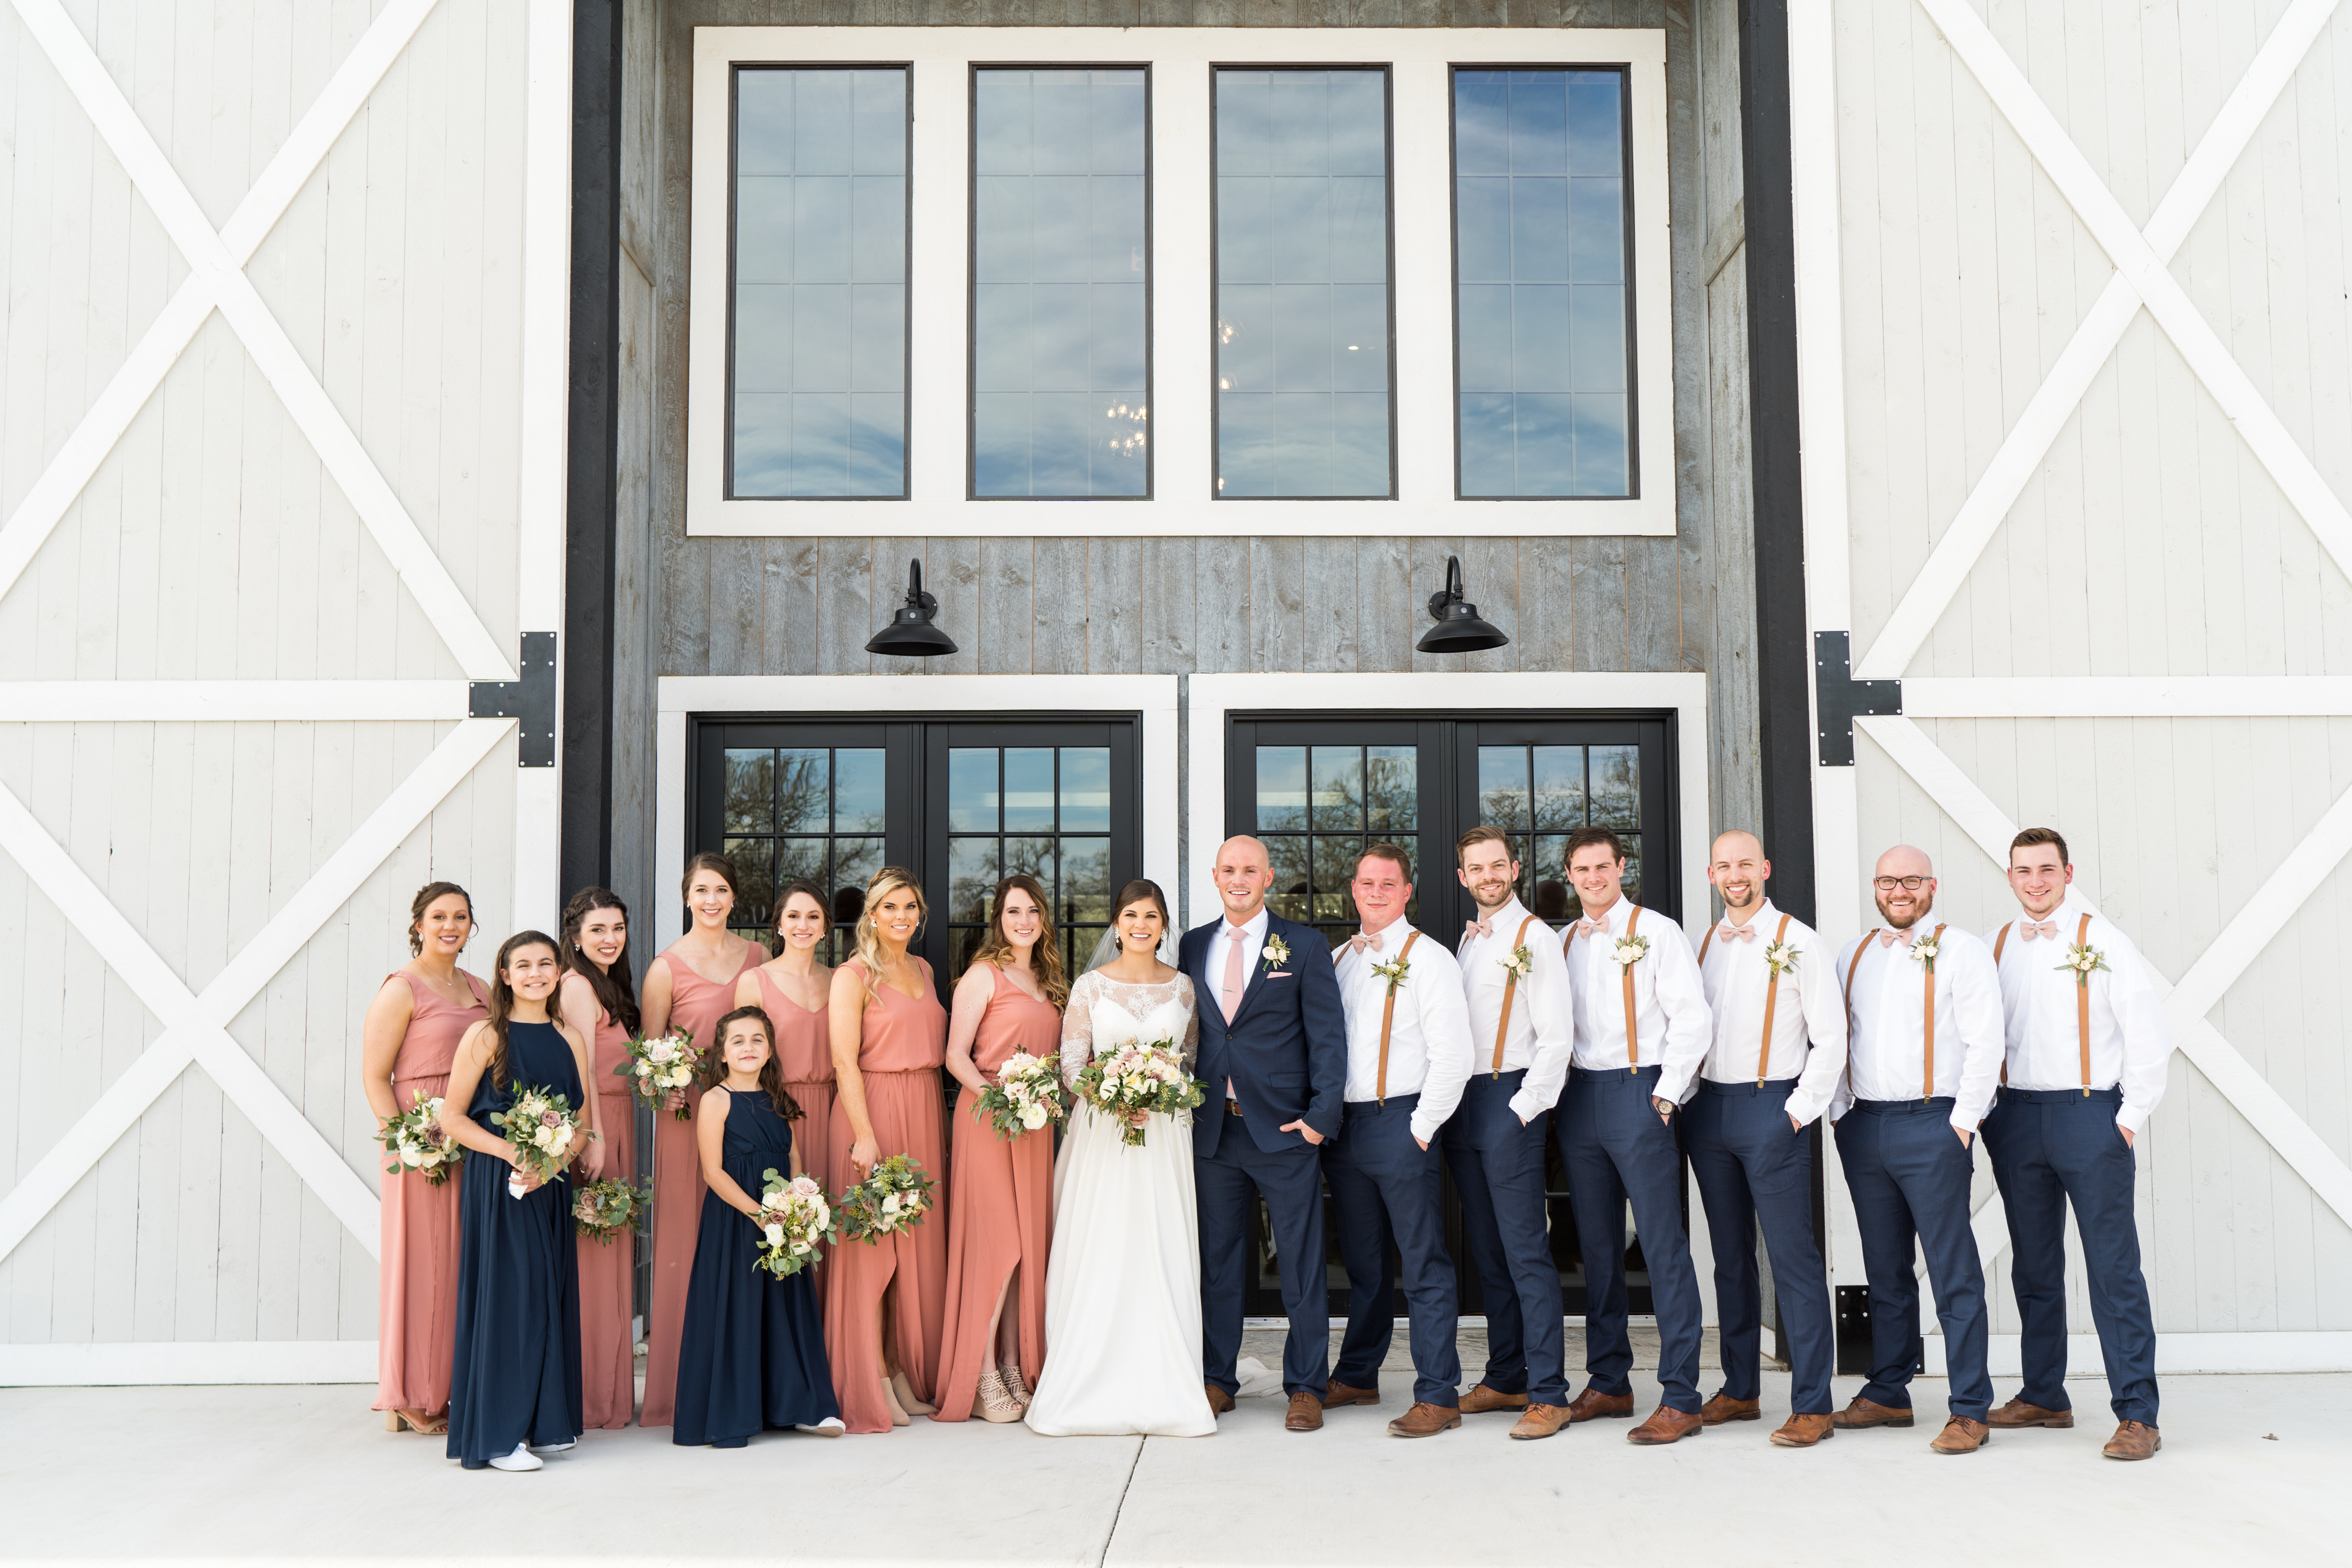 Large wedding party at a barn venue